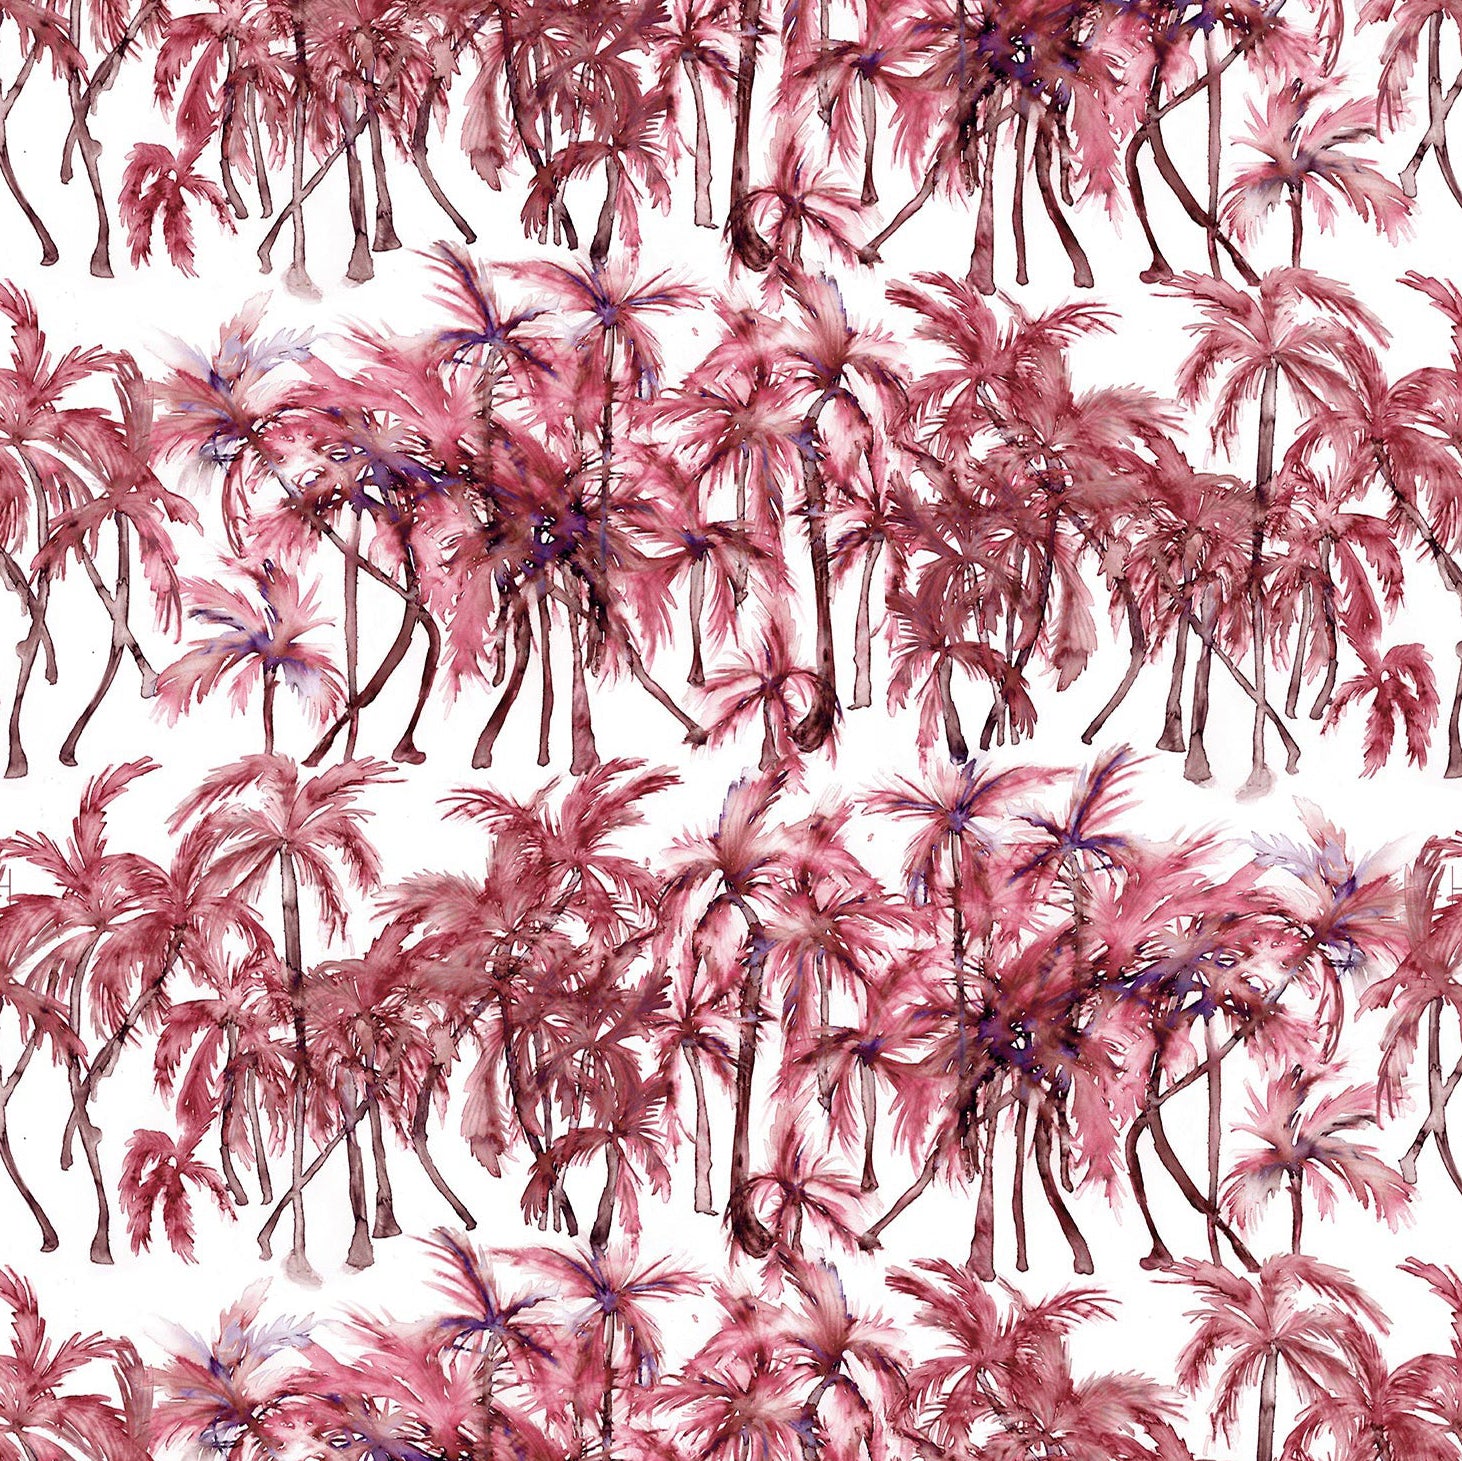 Detail of wallpaper in a painterly palm tree stripe print in shades of pink and red on a white field.